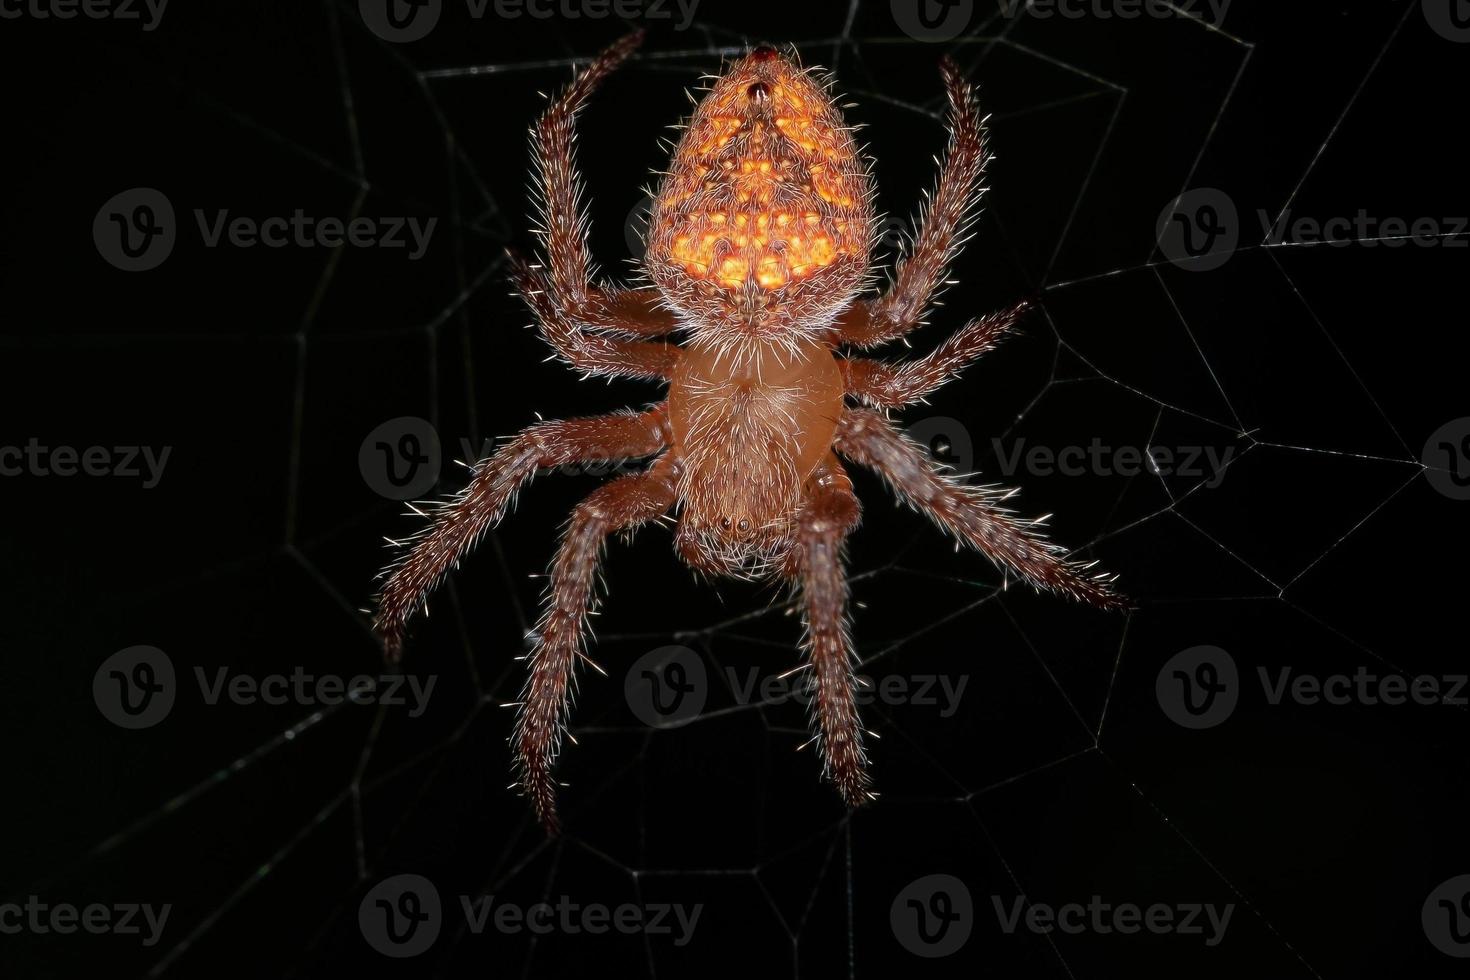 Small Typical Orbweaver photo